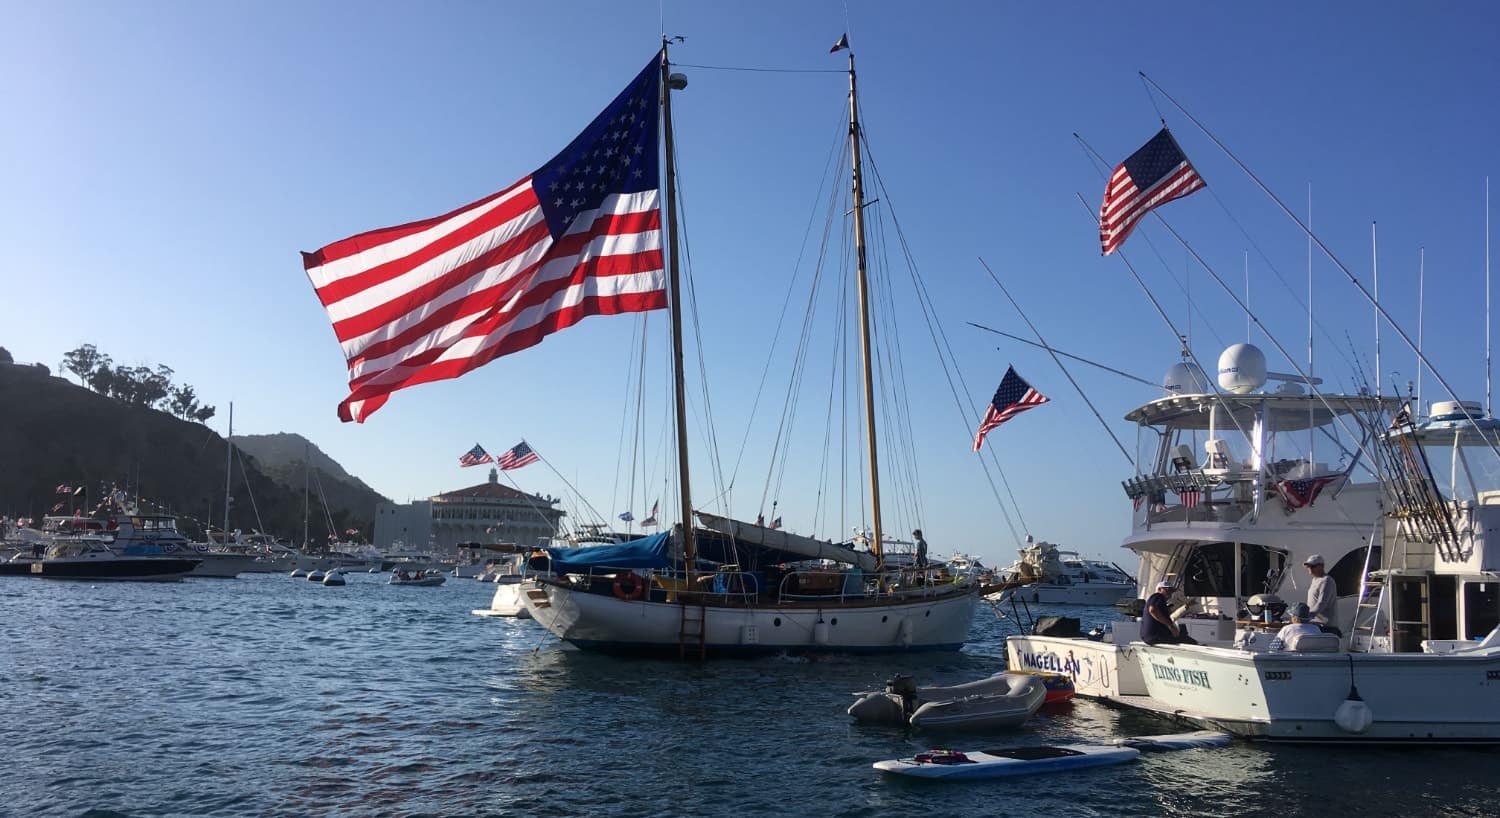 Multiple boats on the water with United States flags blowing in the wind